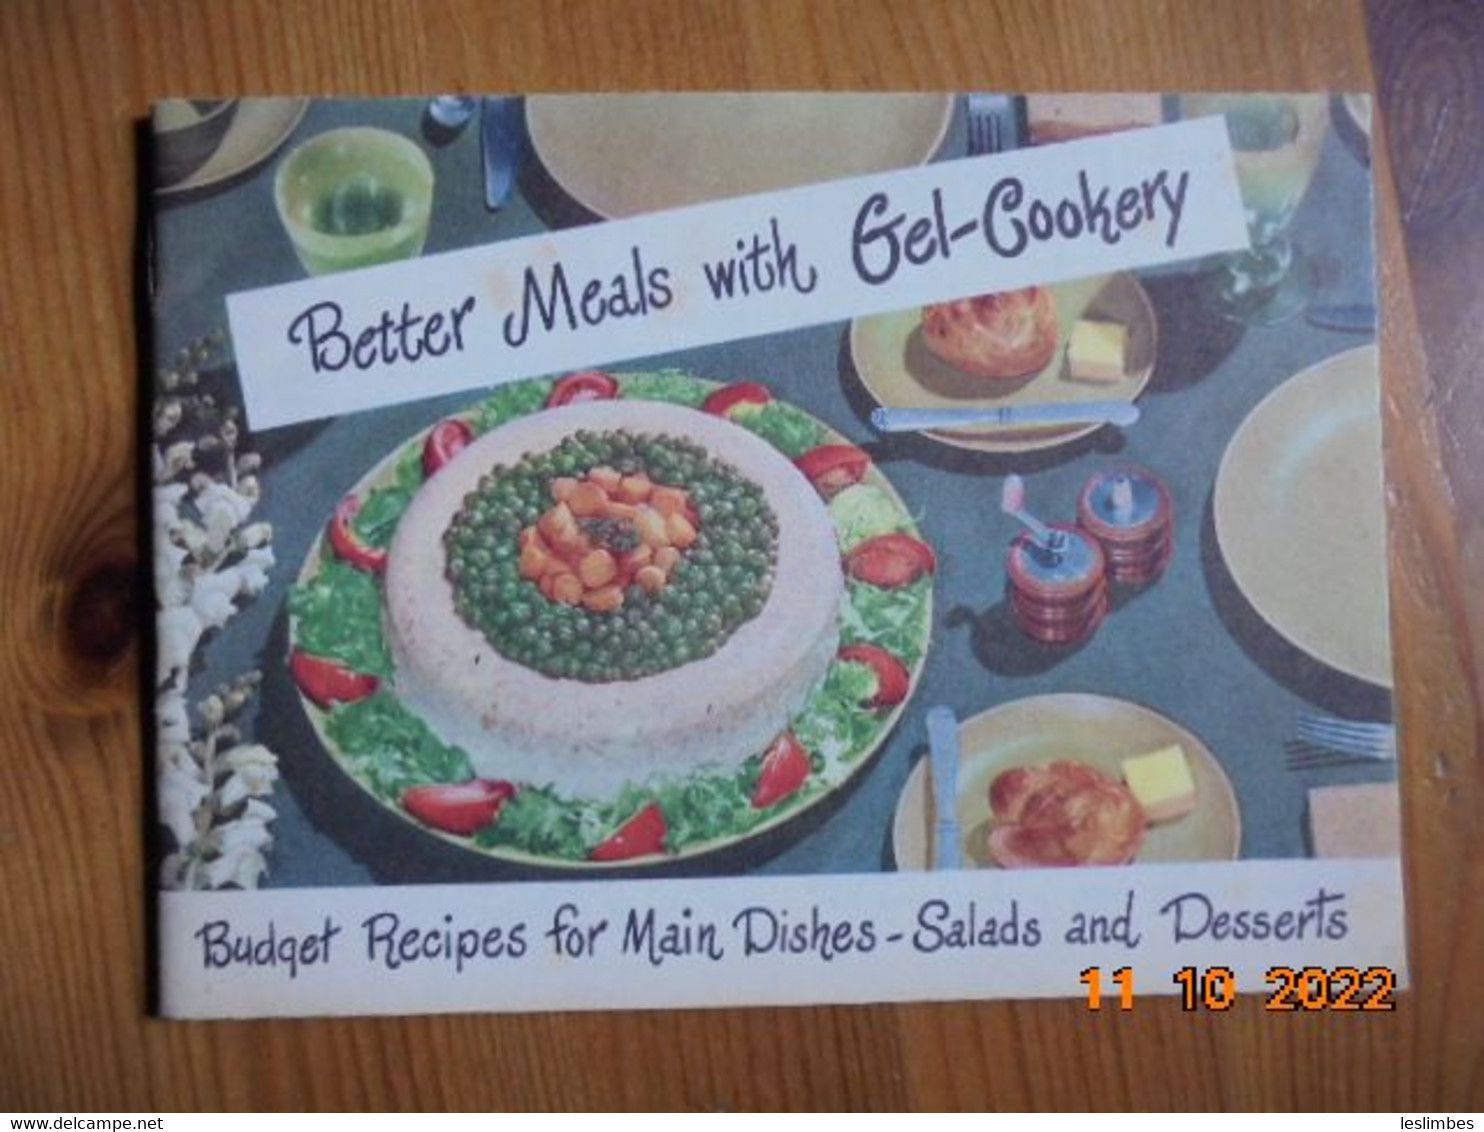 Better Meals With Gel Cookery : Budget Recipes For Main Dishes, Salads And Desserts. Charles B. Knox Gelatine Co. 1952 - Noord-Amerikaans